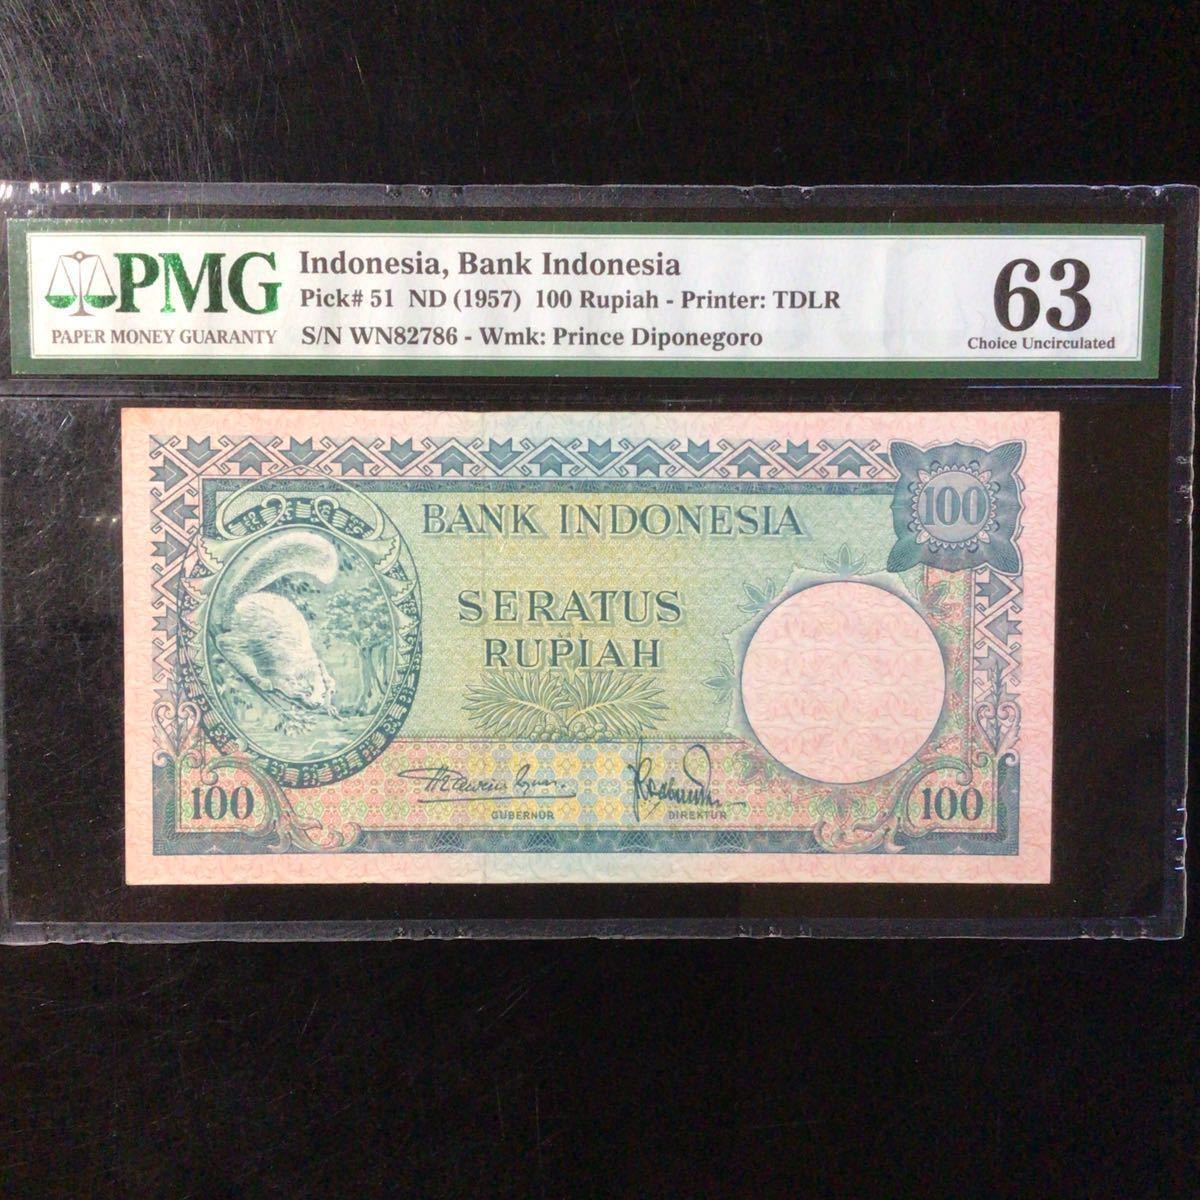 World Banknote Grading INDONESIA《Bank Indonesia》100 Rupiah【1957】『PMG Grading Choice Uncirculated 63』